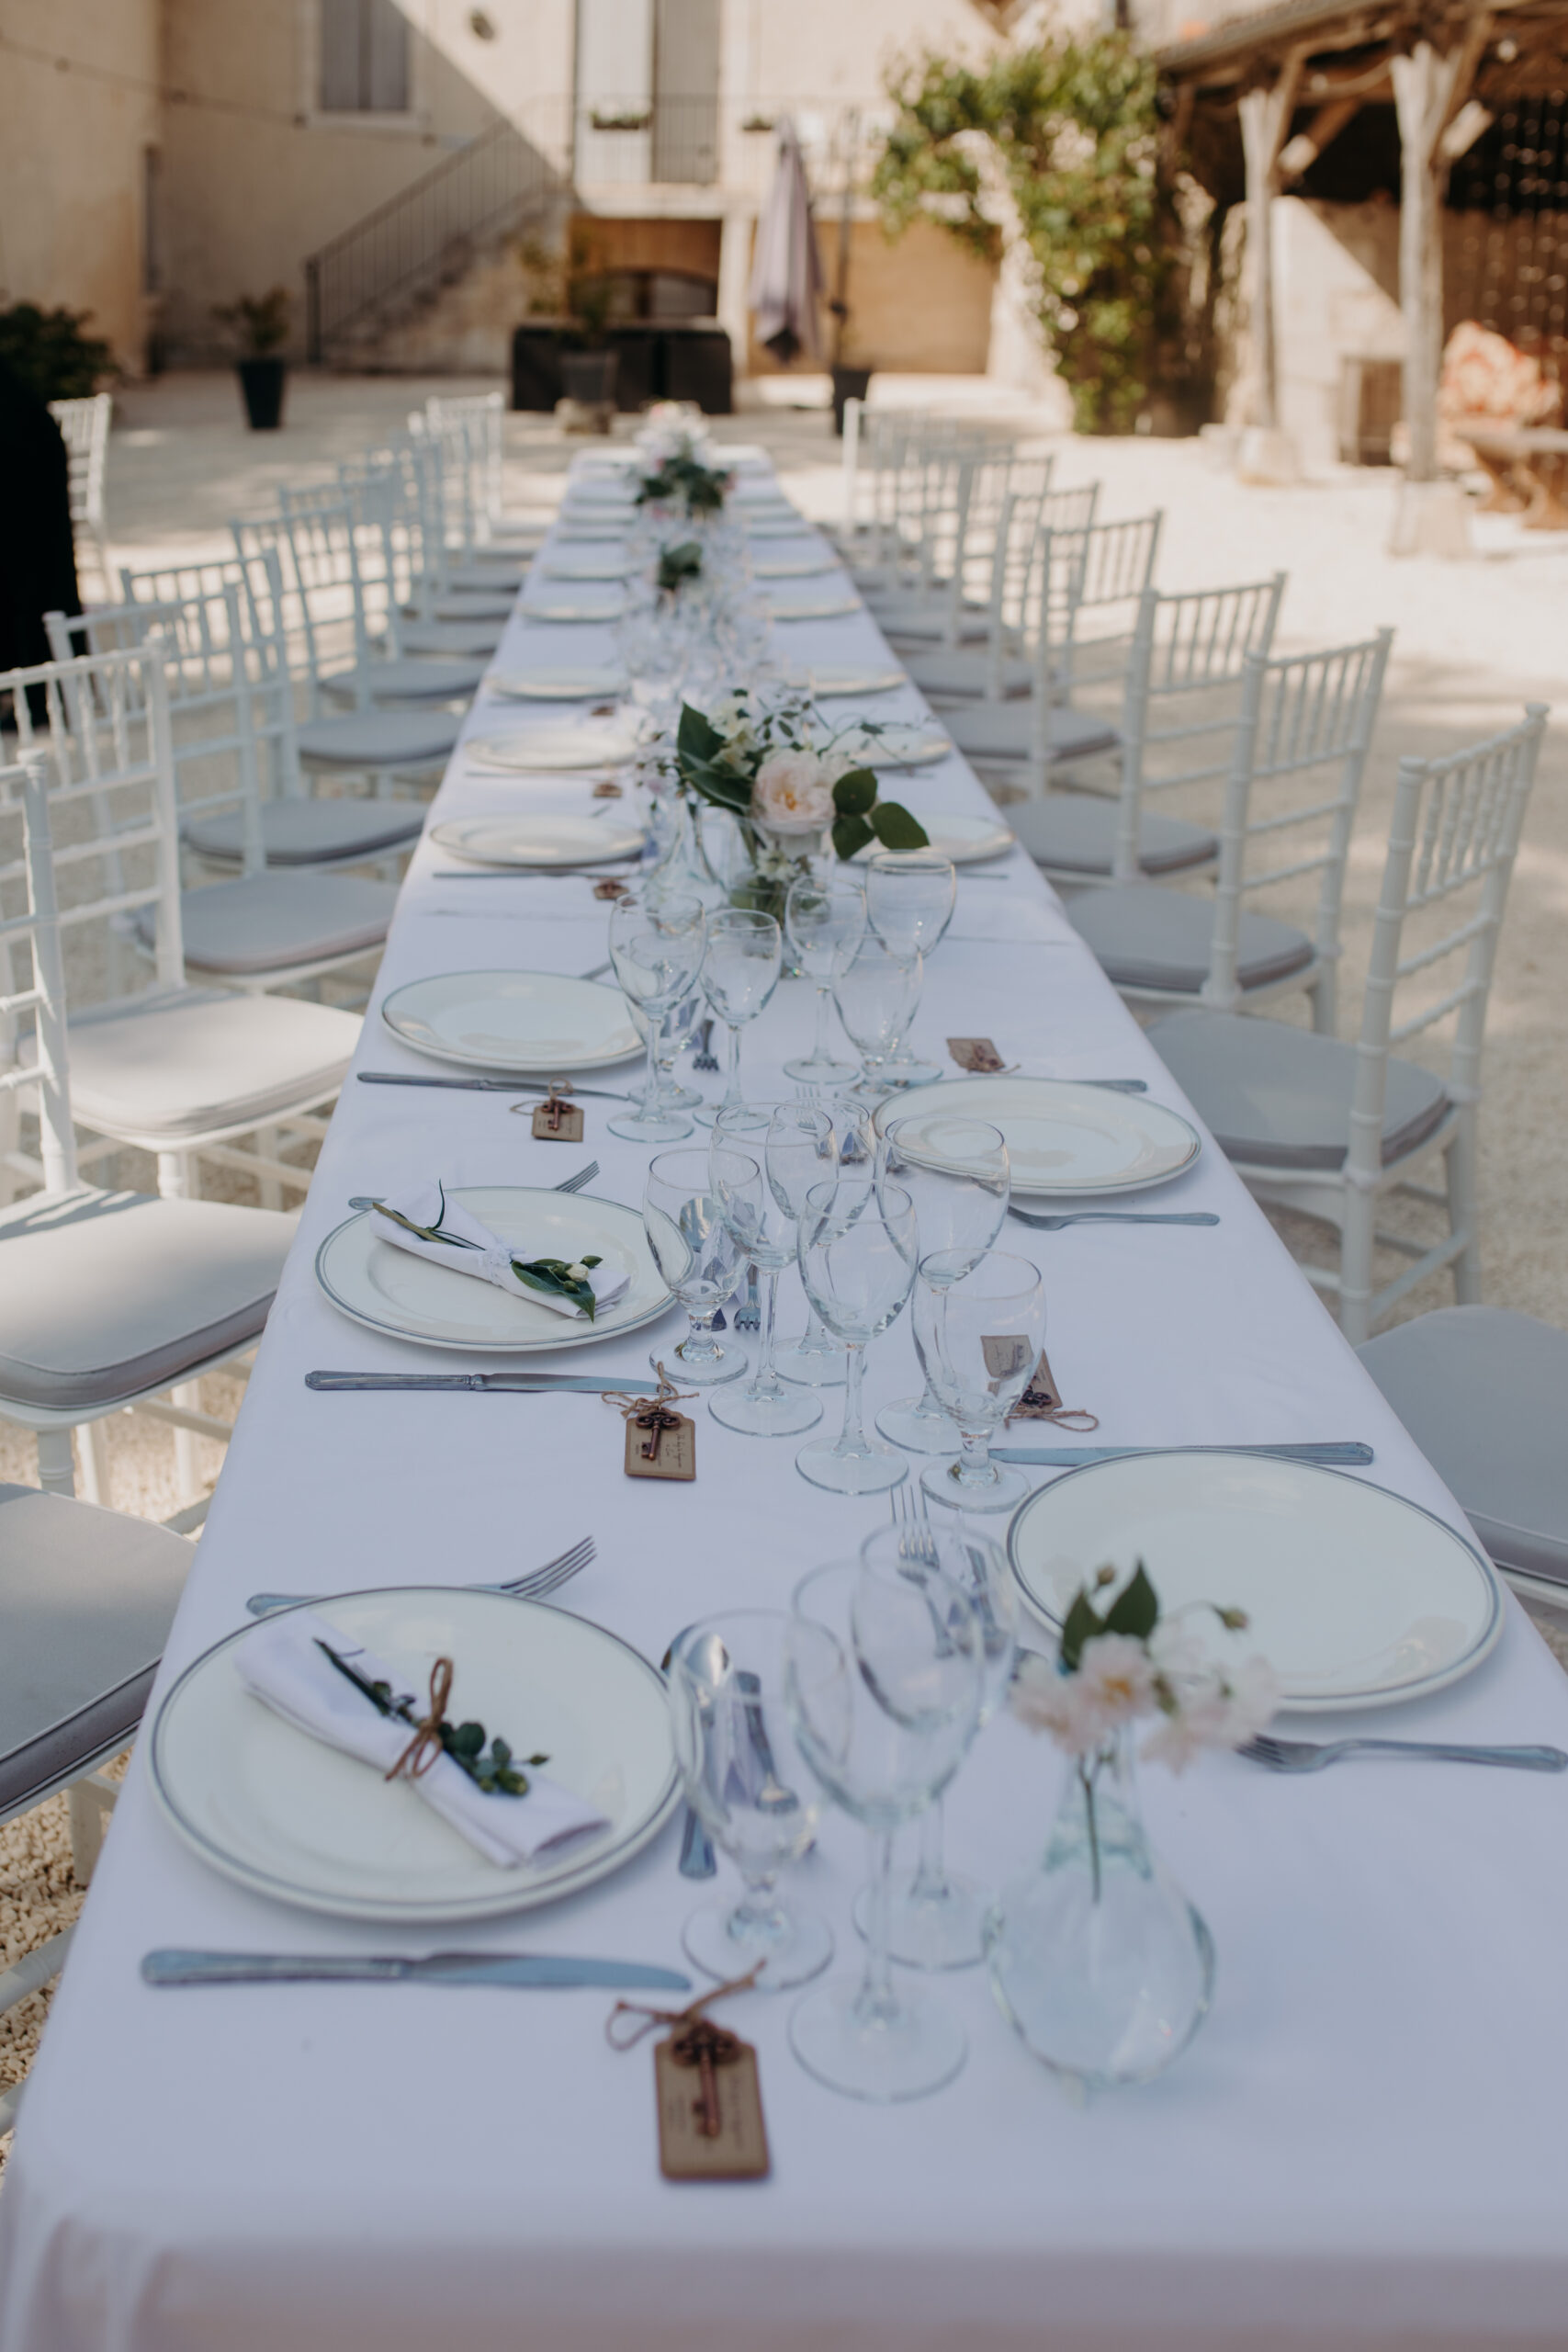 A long table is set up with plates and cutlery with multiple rose centerpieces